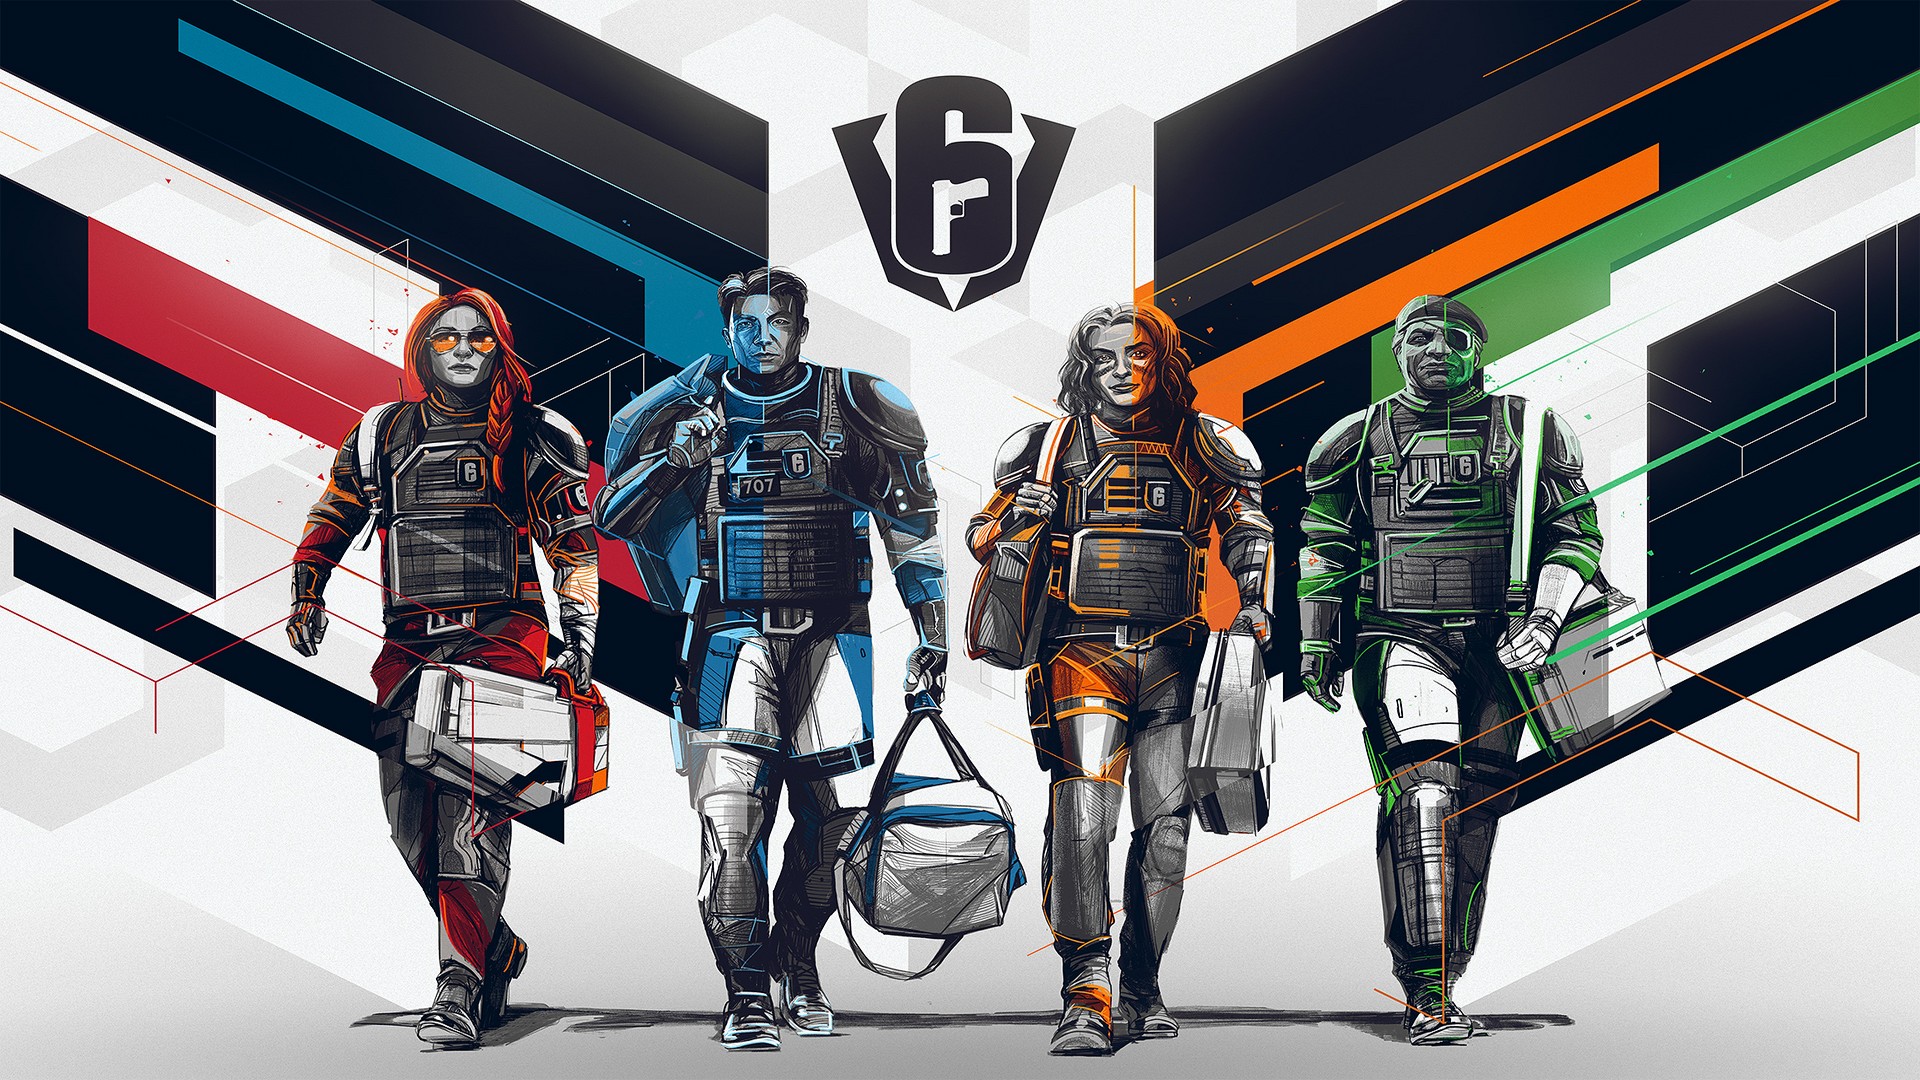 ROAD TO SIX INVITATIONAL IN-GAME EVENT IS BACK IN TOM CLANCY'S RAINBOW SIX SIEGE